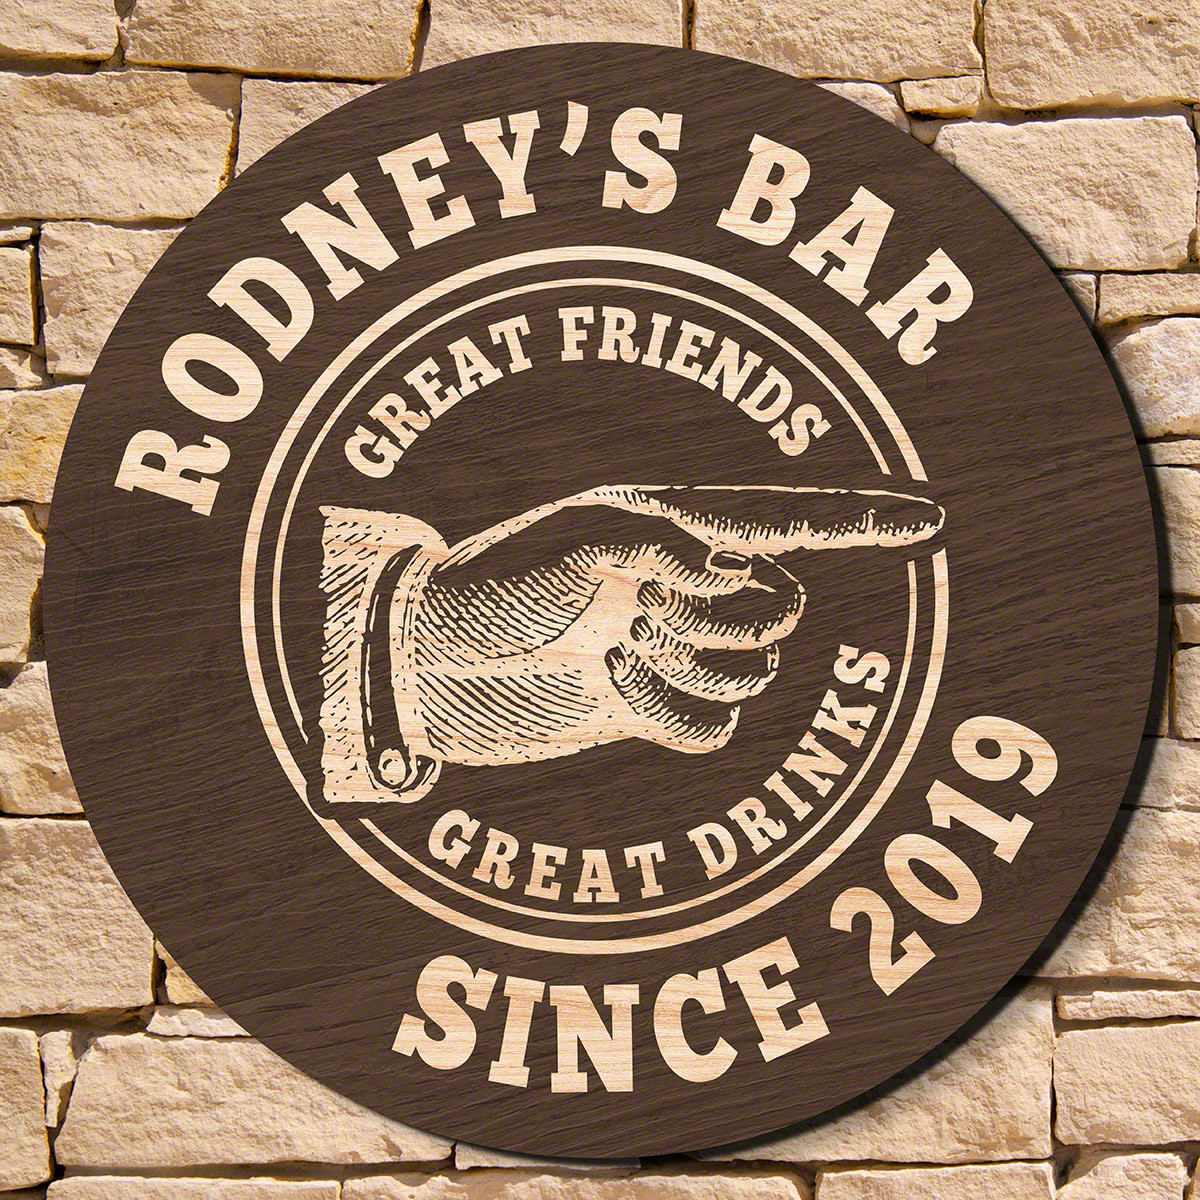 The only thing missing from your home bar is a way for guests to know which way to go for a drink when they arrive. Eliminate the need for giving directions with our vintage bar custom wooden welcome sign, which comes engraved with two lines of text and a #bar